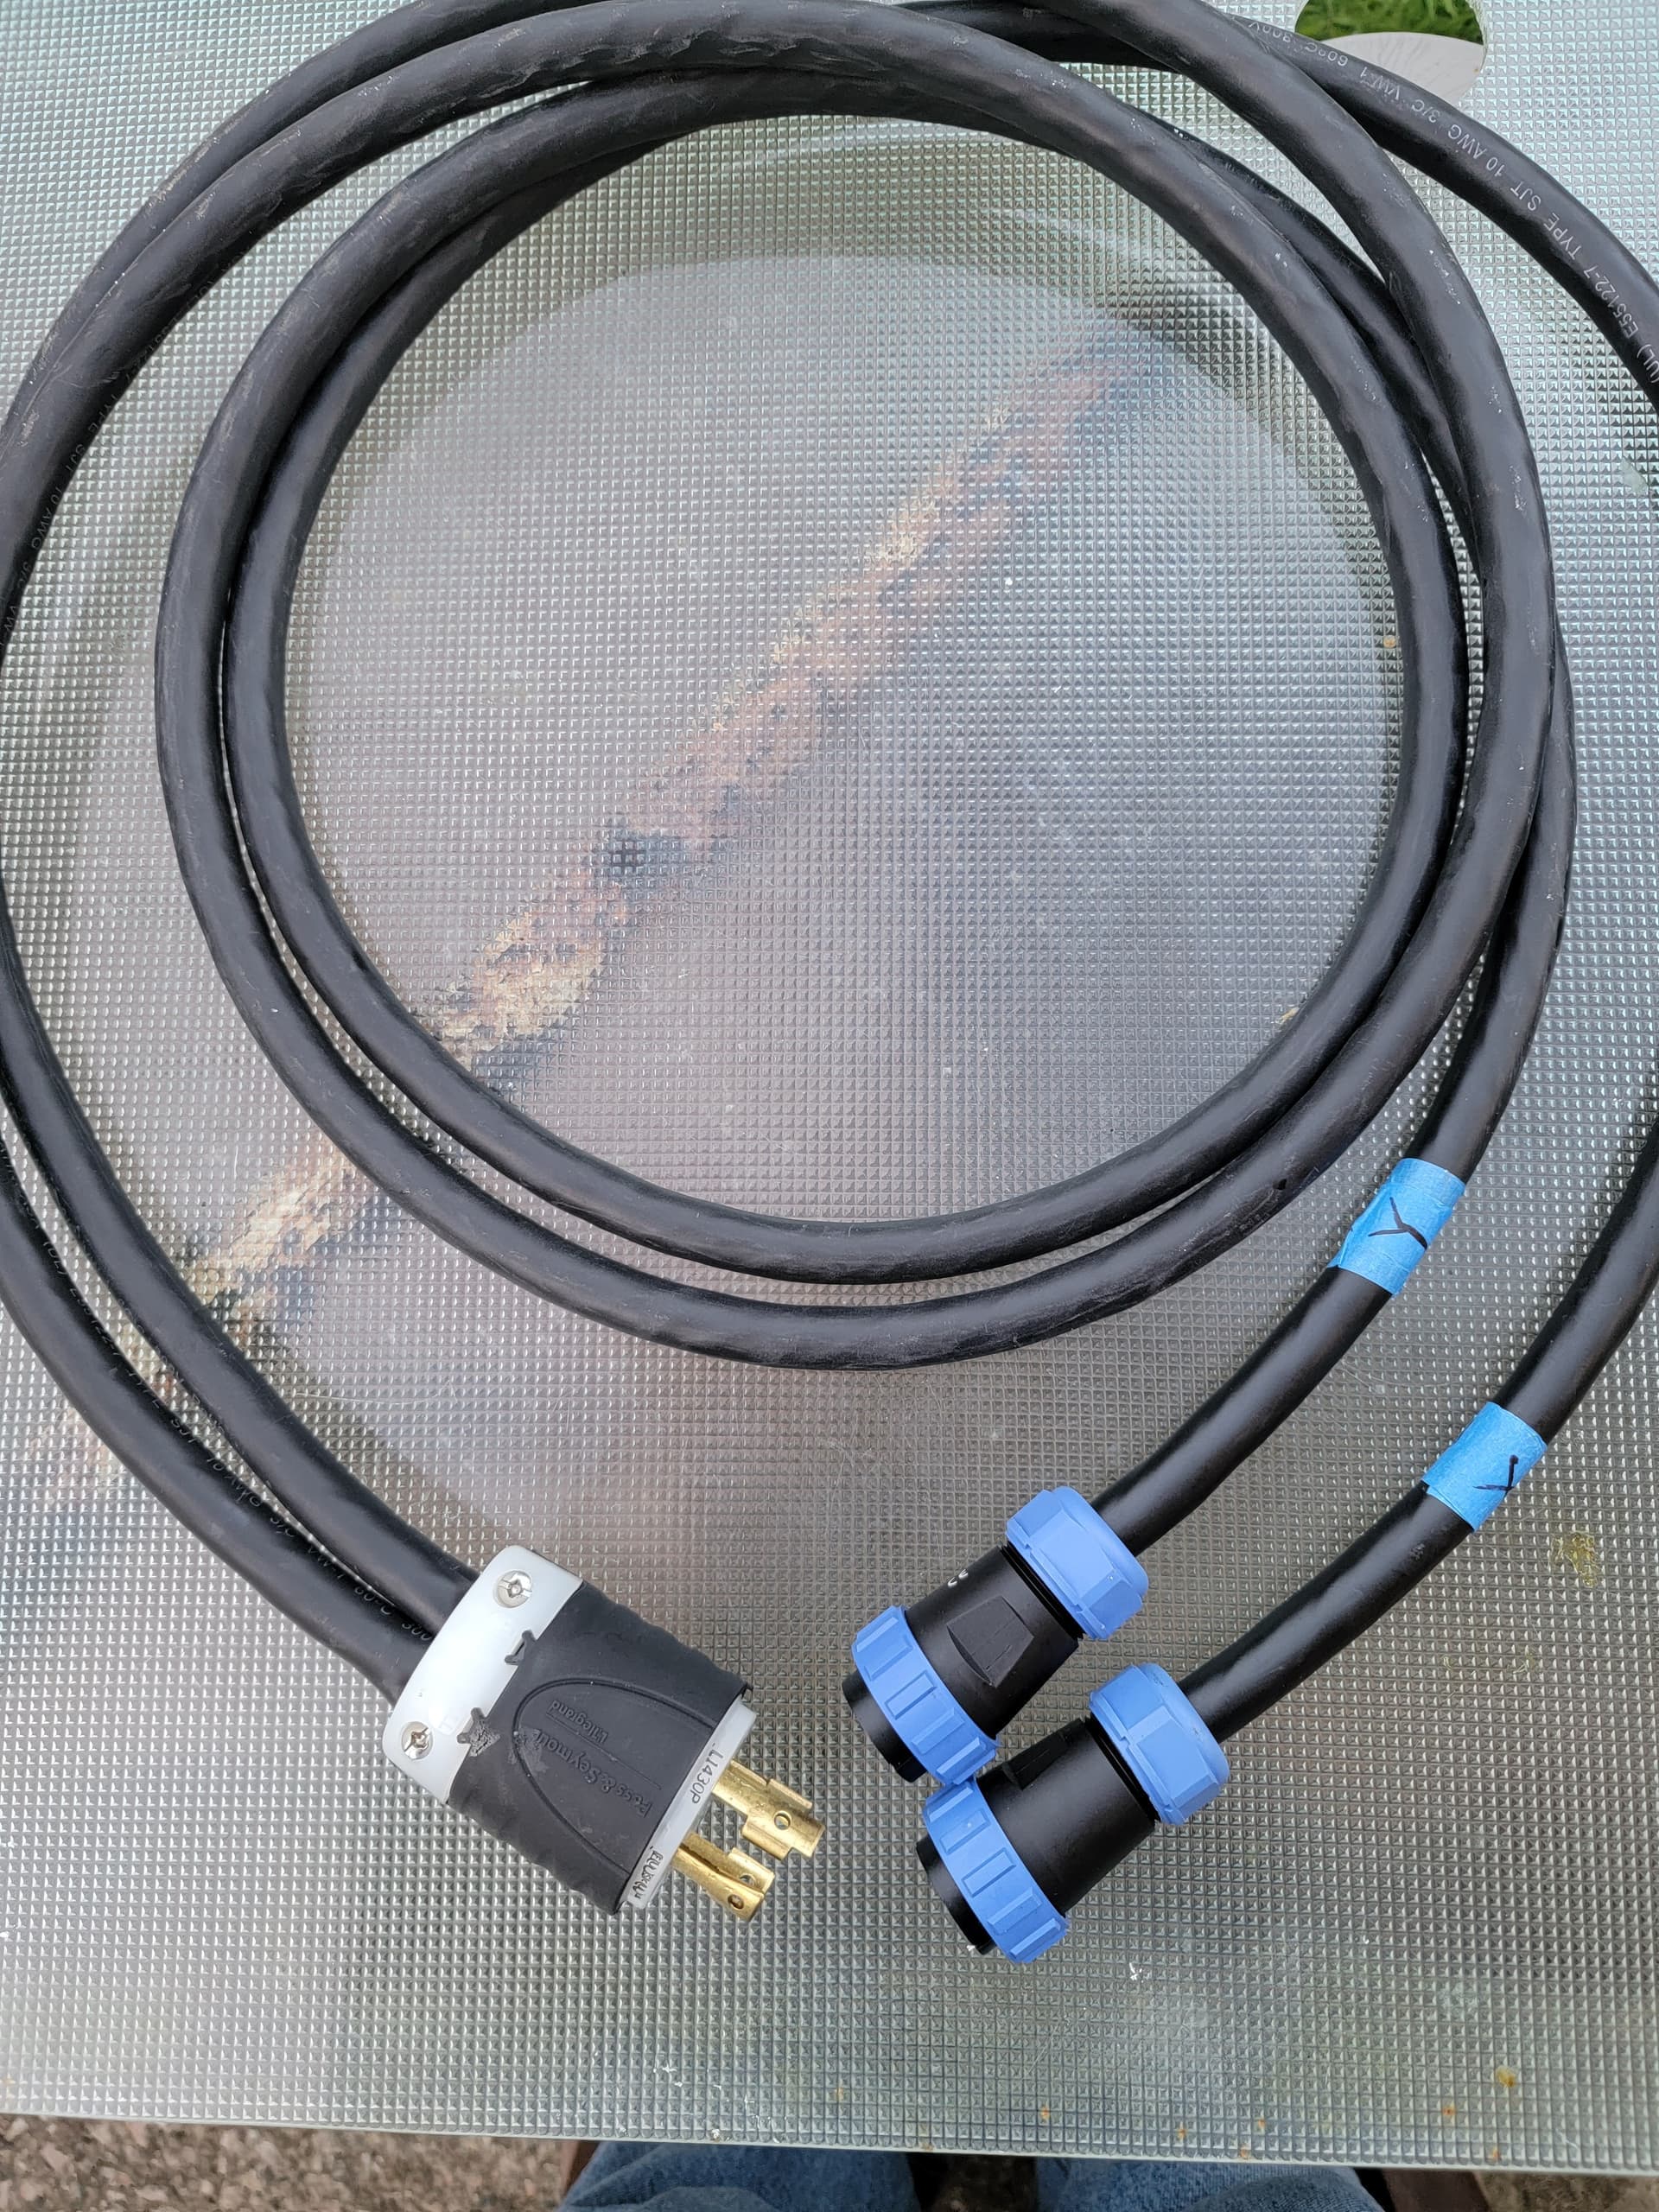 Split phase cable